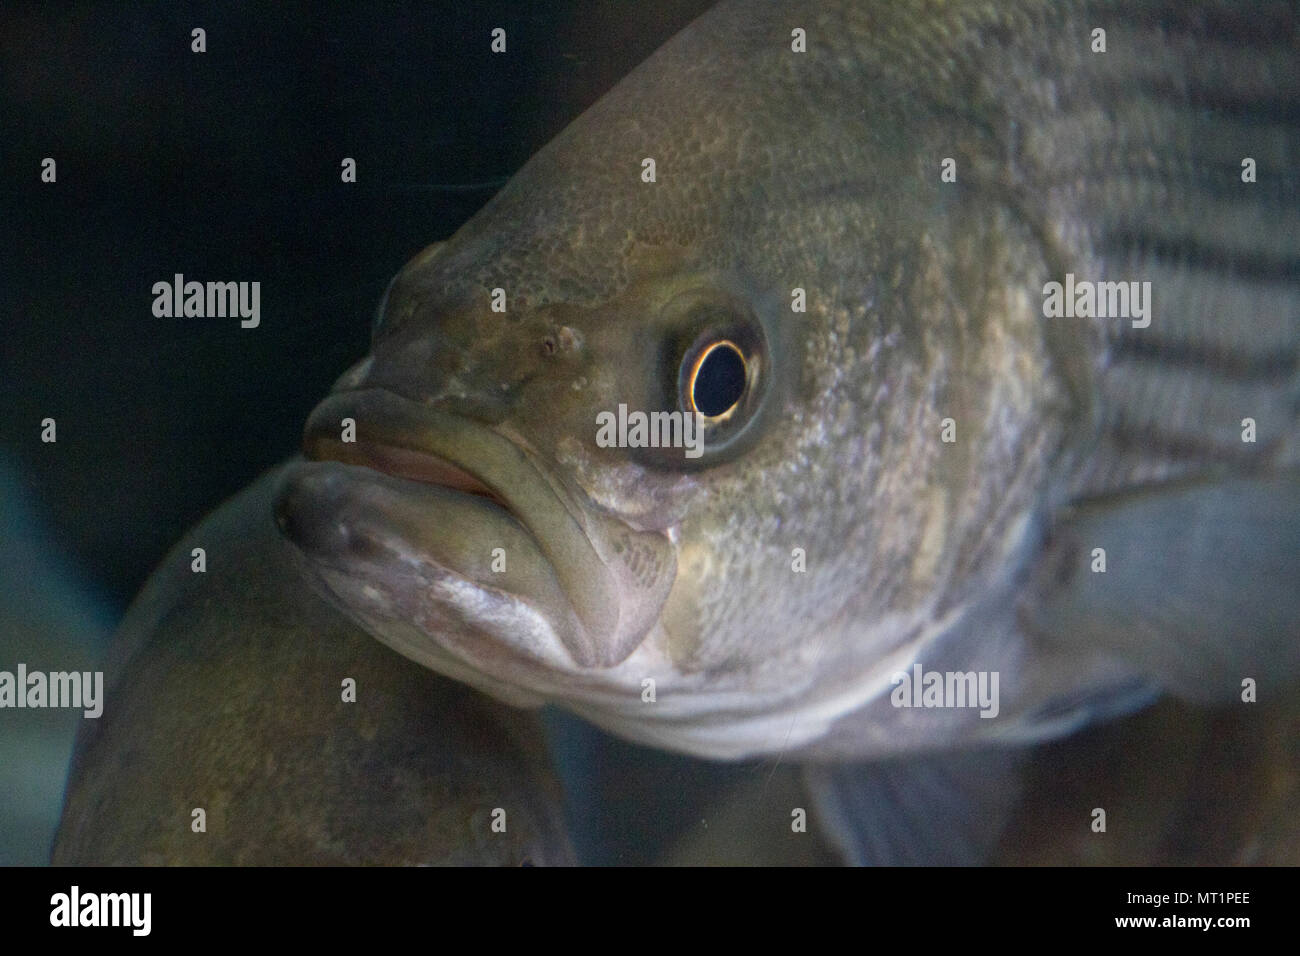 Close up of the grumpy looking face of a striped bass swimming